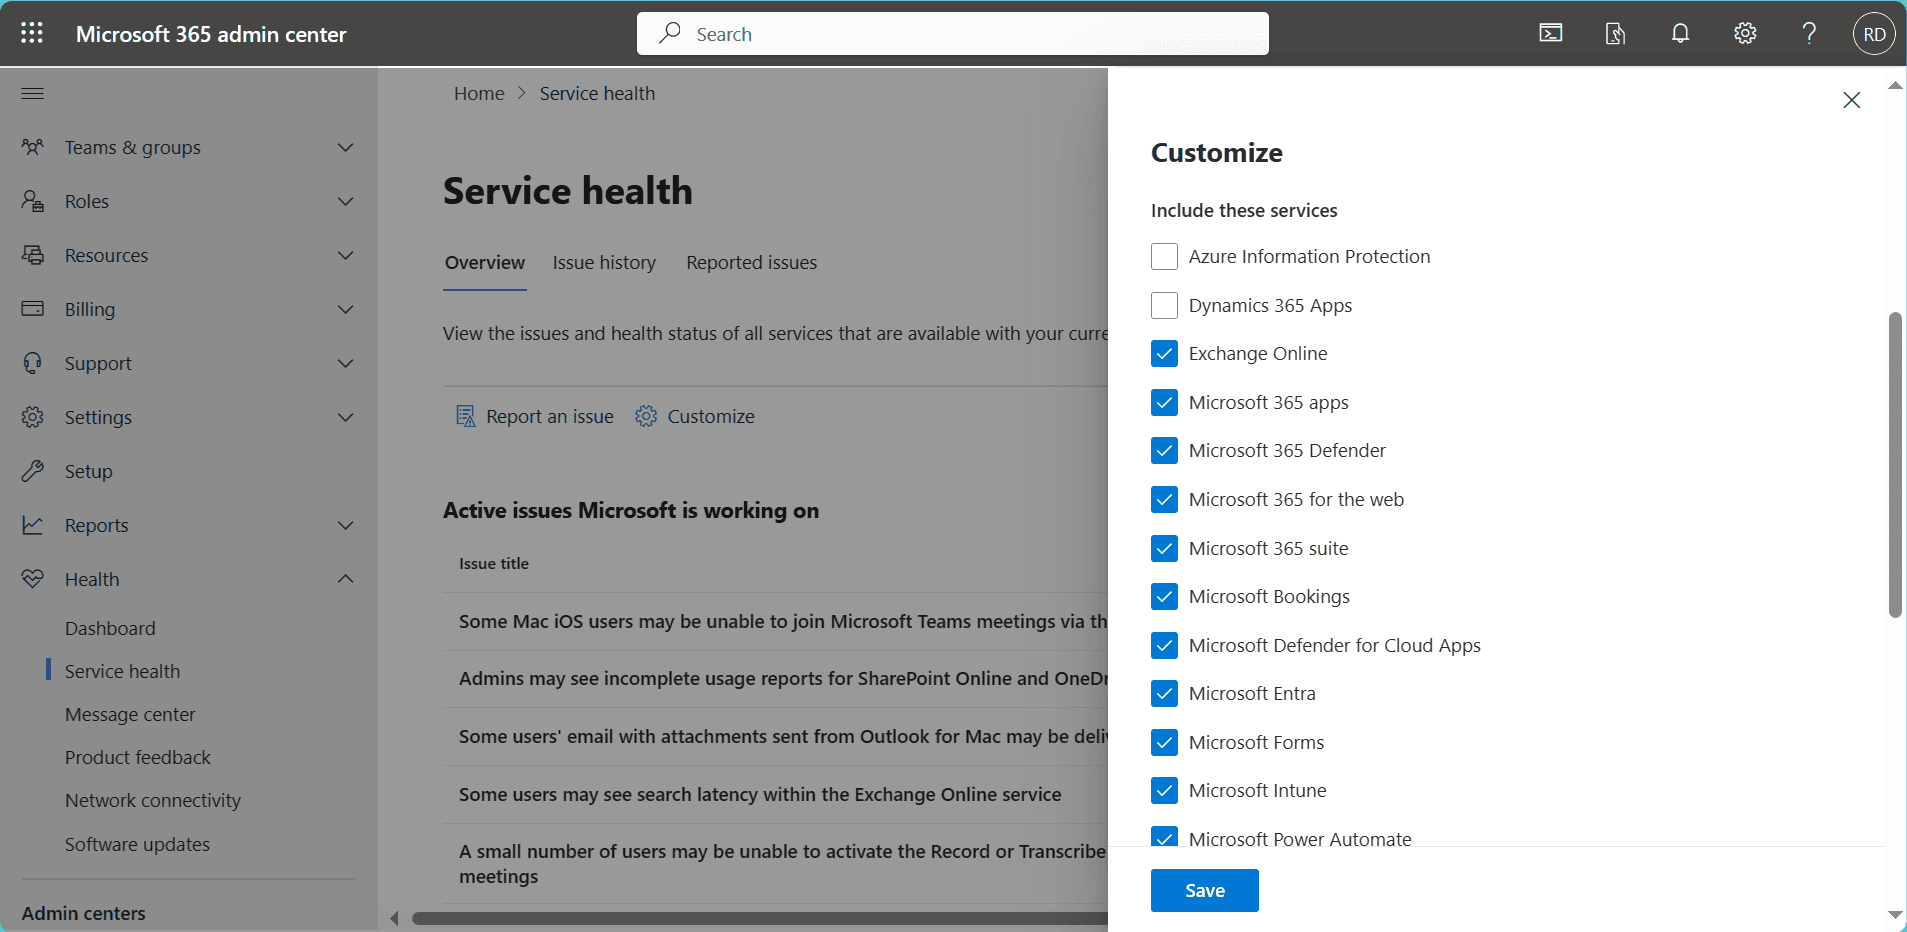 Customization tab with some services unchecked